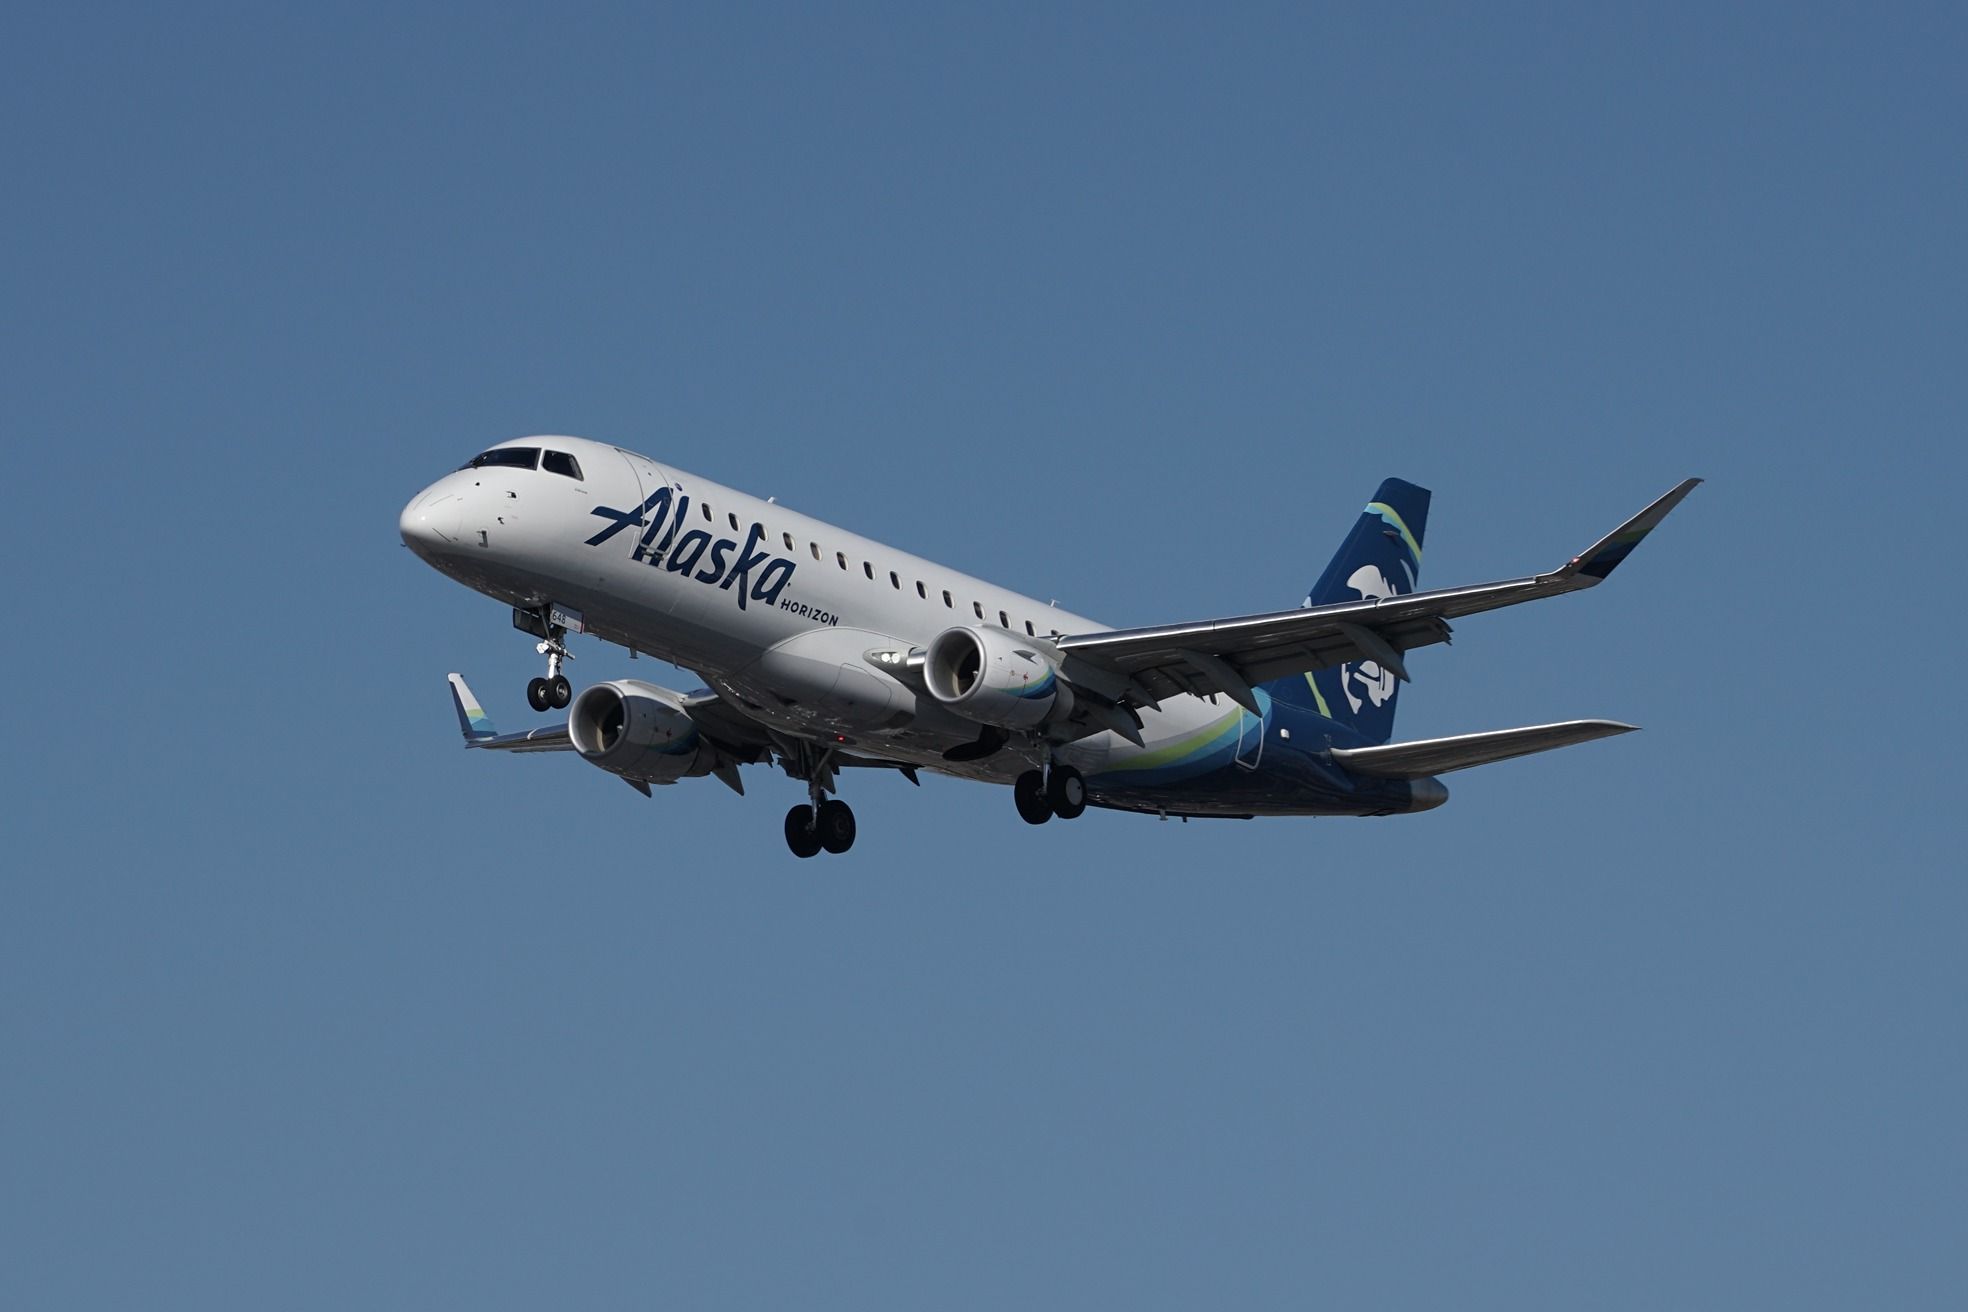 Alaska Airlines_Horizon Air Embraer E175 on approach to LAX-1